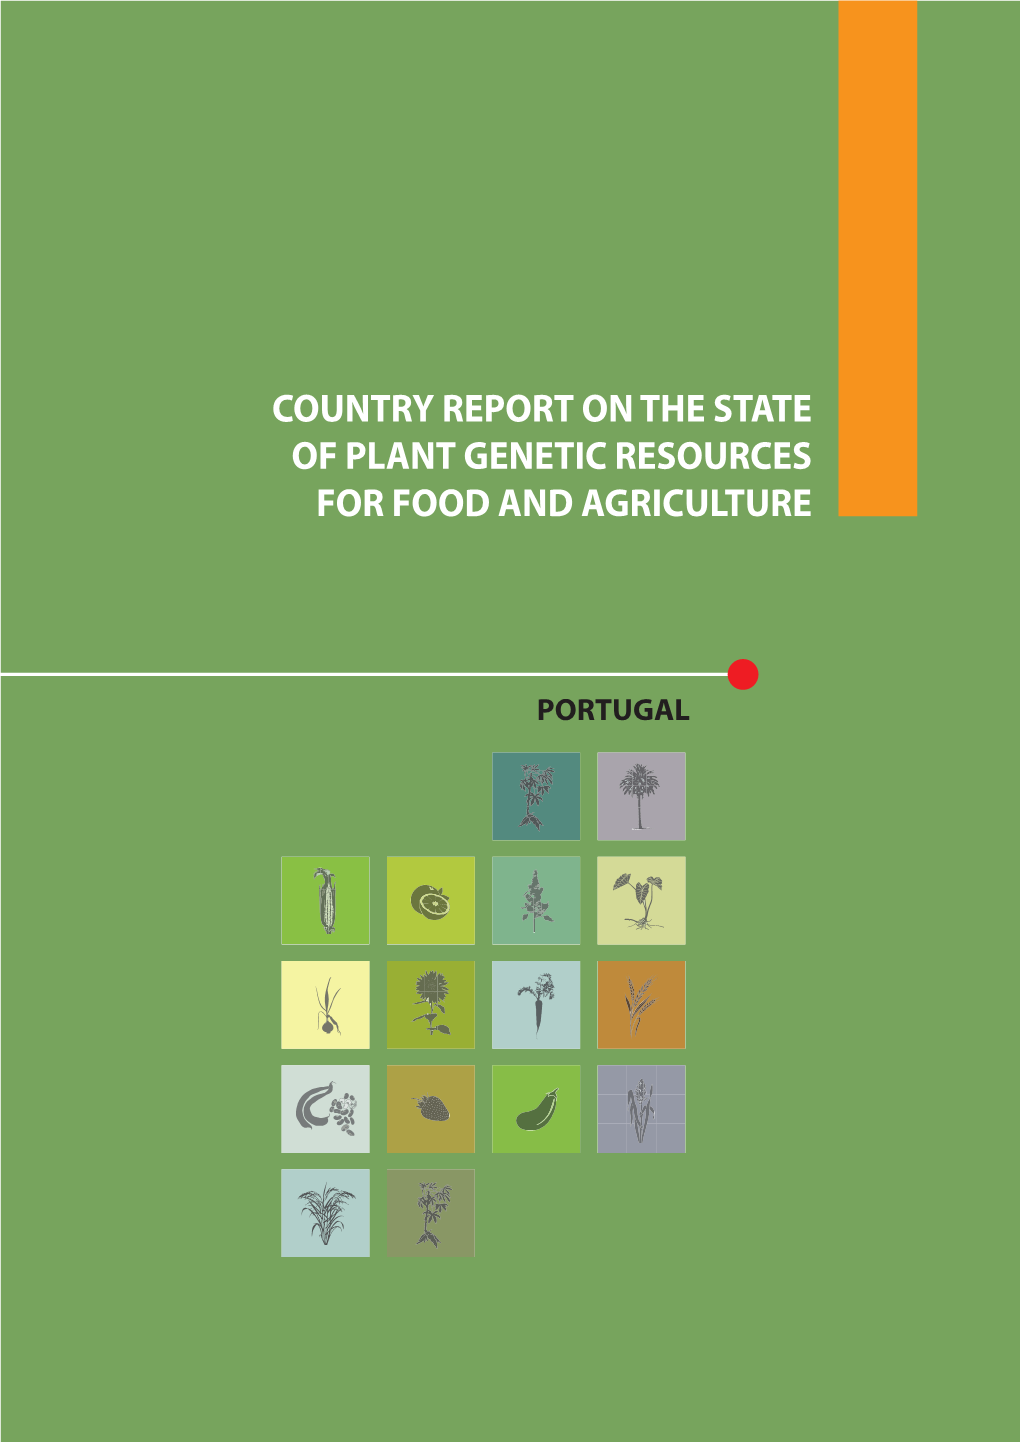 PORTUGAL State of Plant Genetic Resources for Food and Agriculture in Portugal